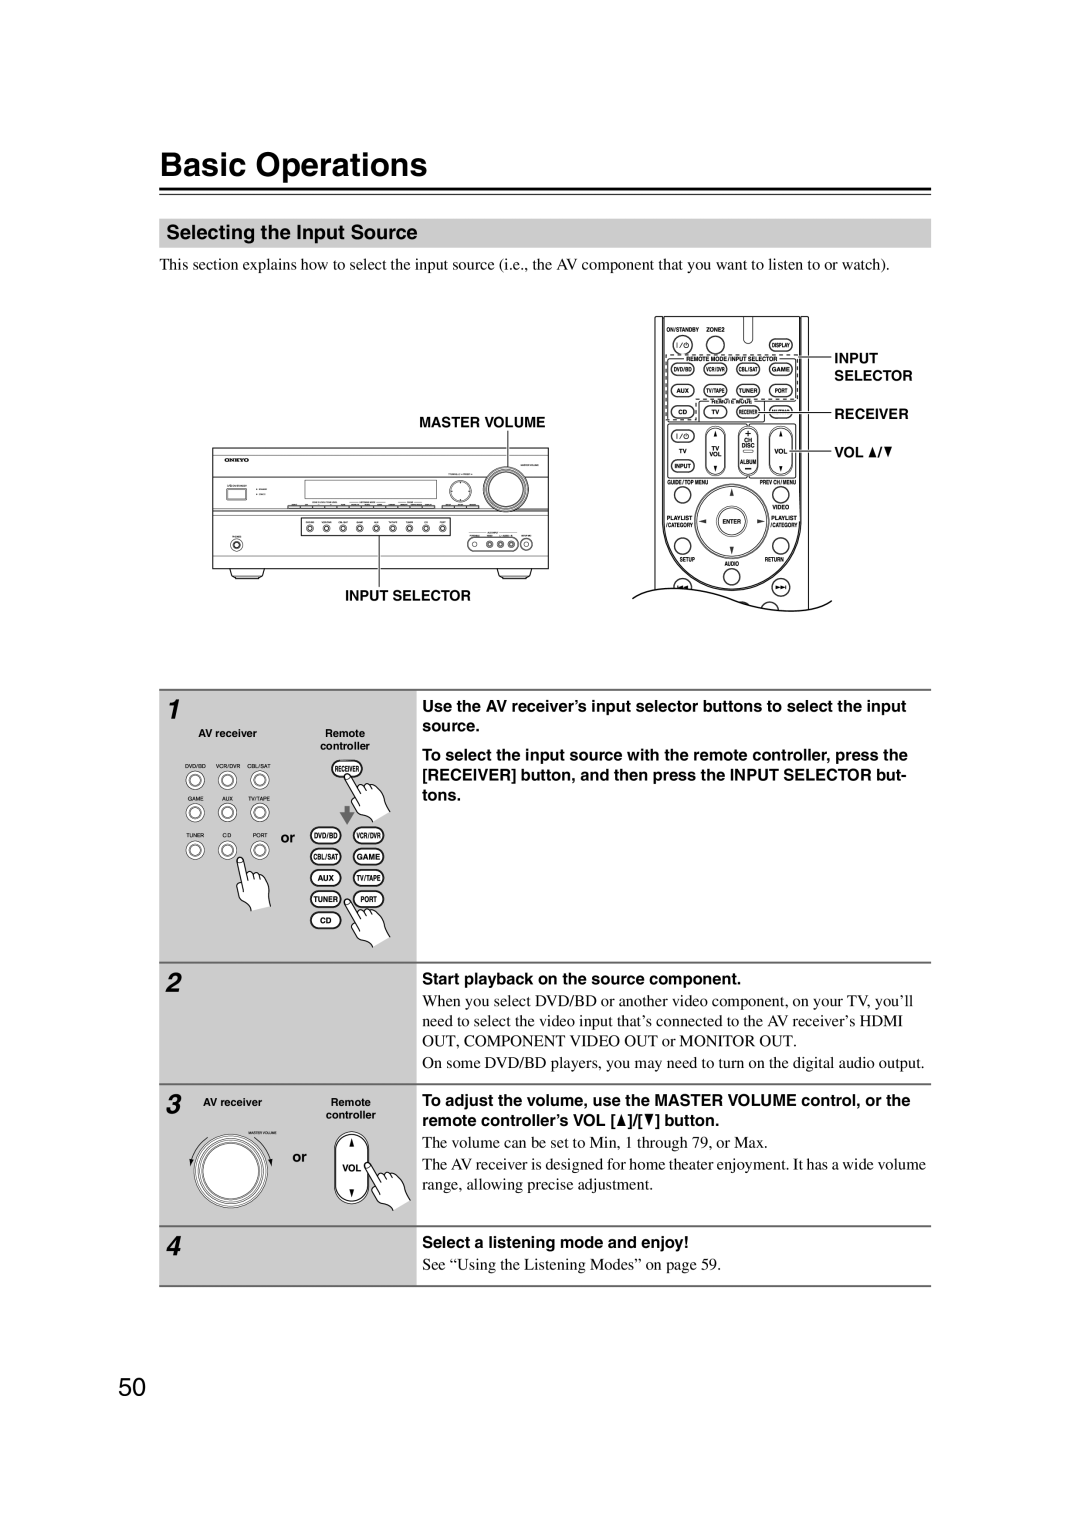 Onkyo HT-RC160 instruction manual Basic Operations, Selecting the Input Source 